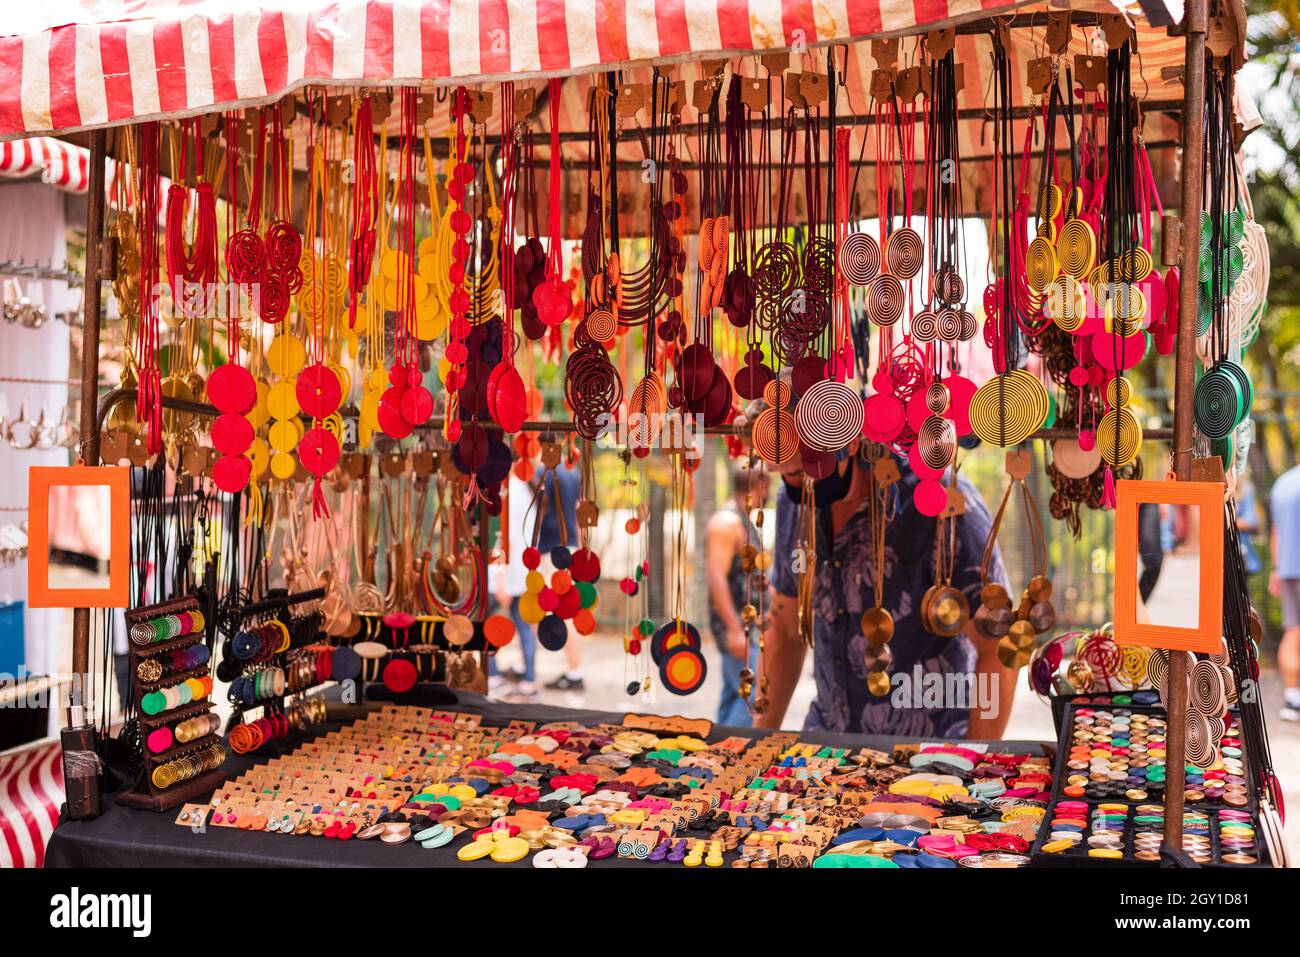 https://c8.alamy.com/comp/2GY1D81/colorful-handmade-costume-jewelry-at-the-belo-horizonte-hippie-fair-in-brazil-2GY1D81.jpg